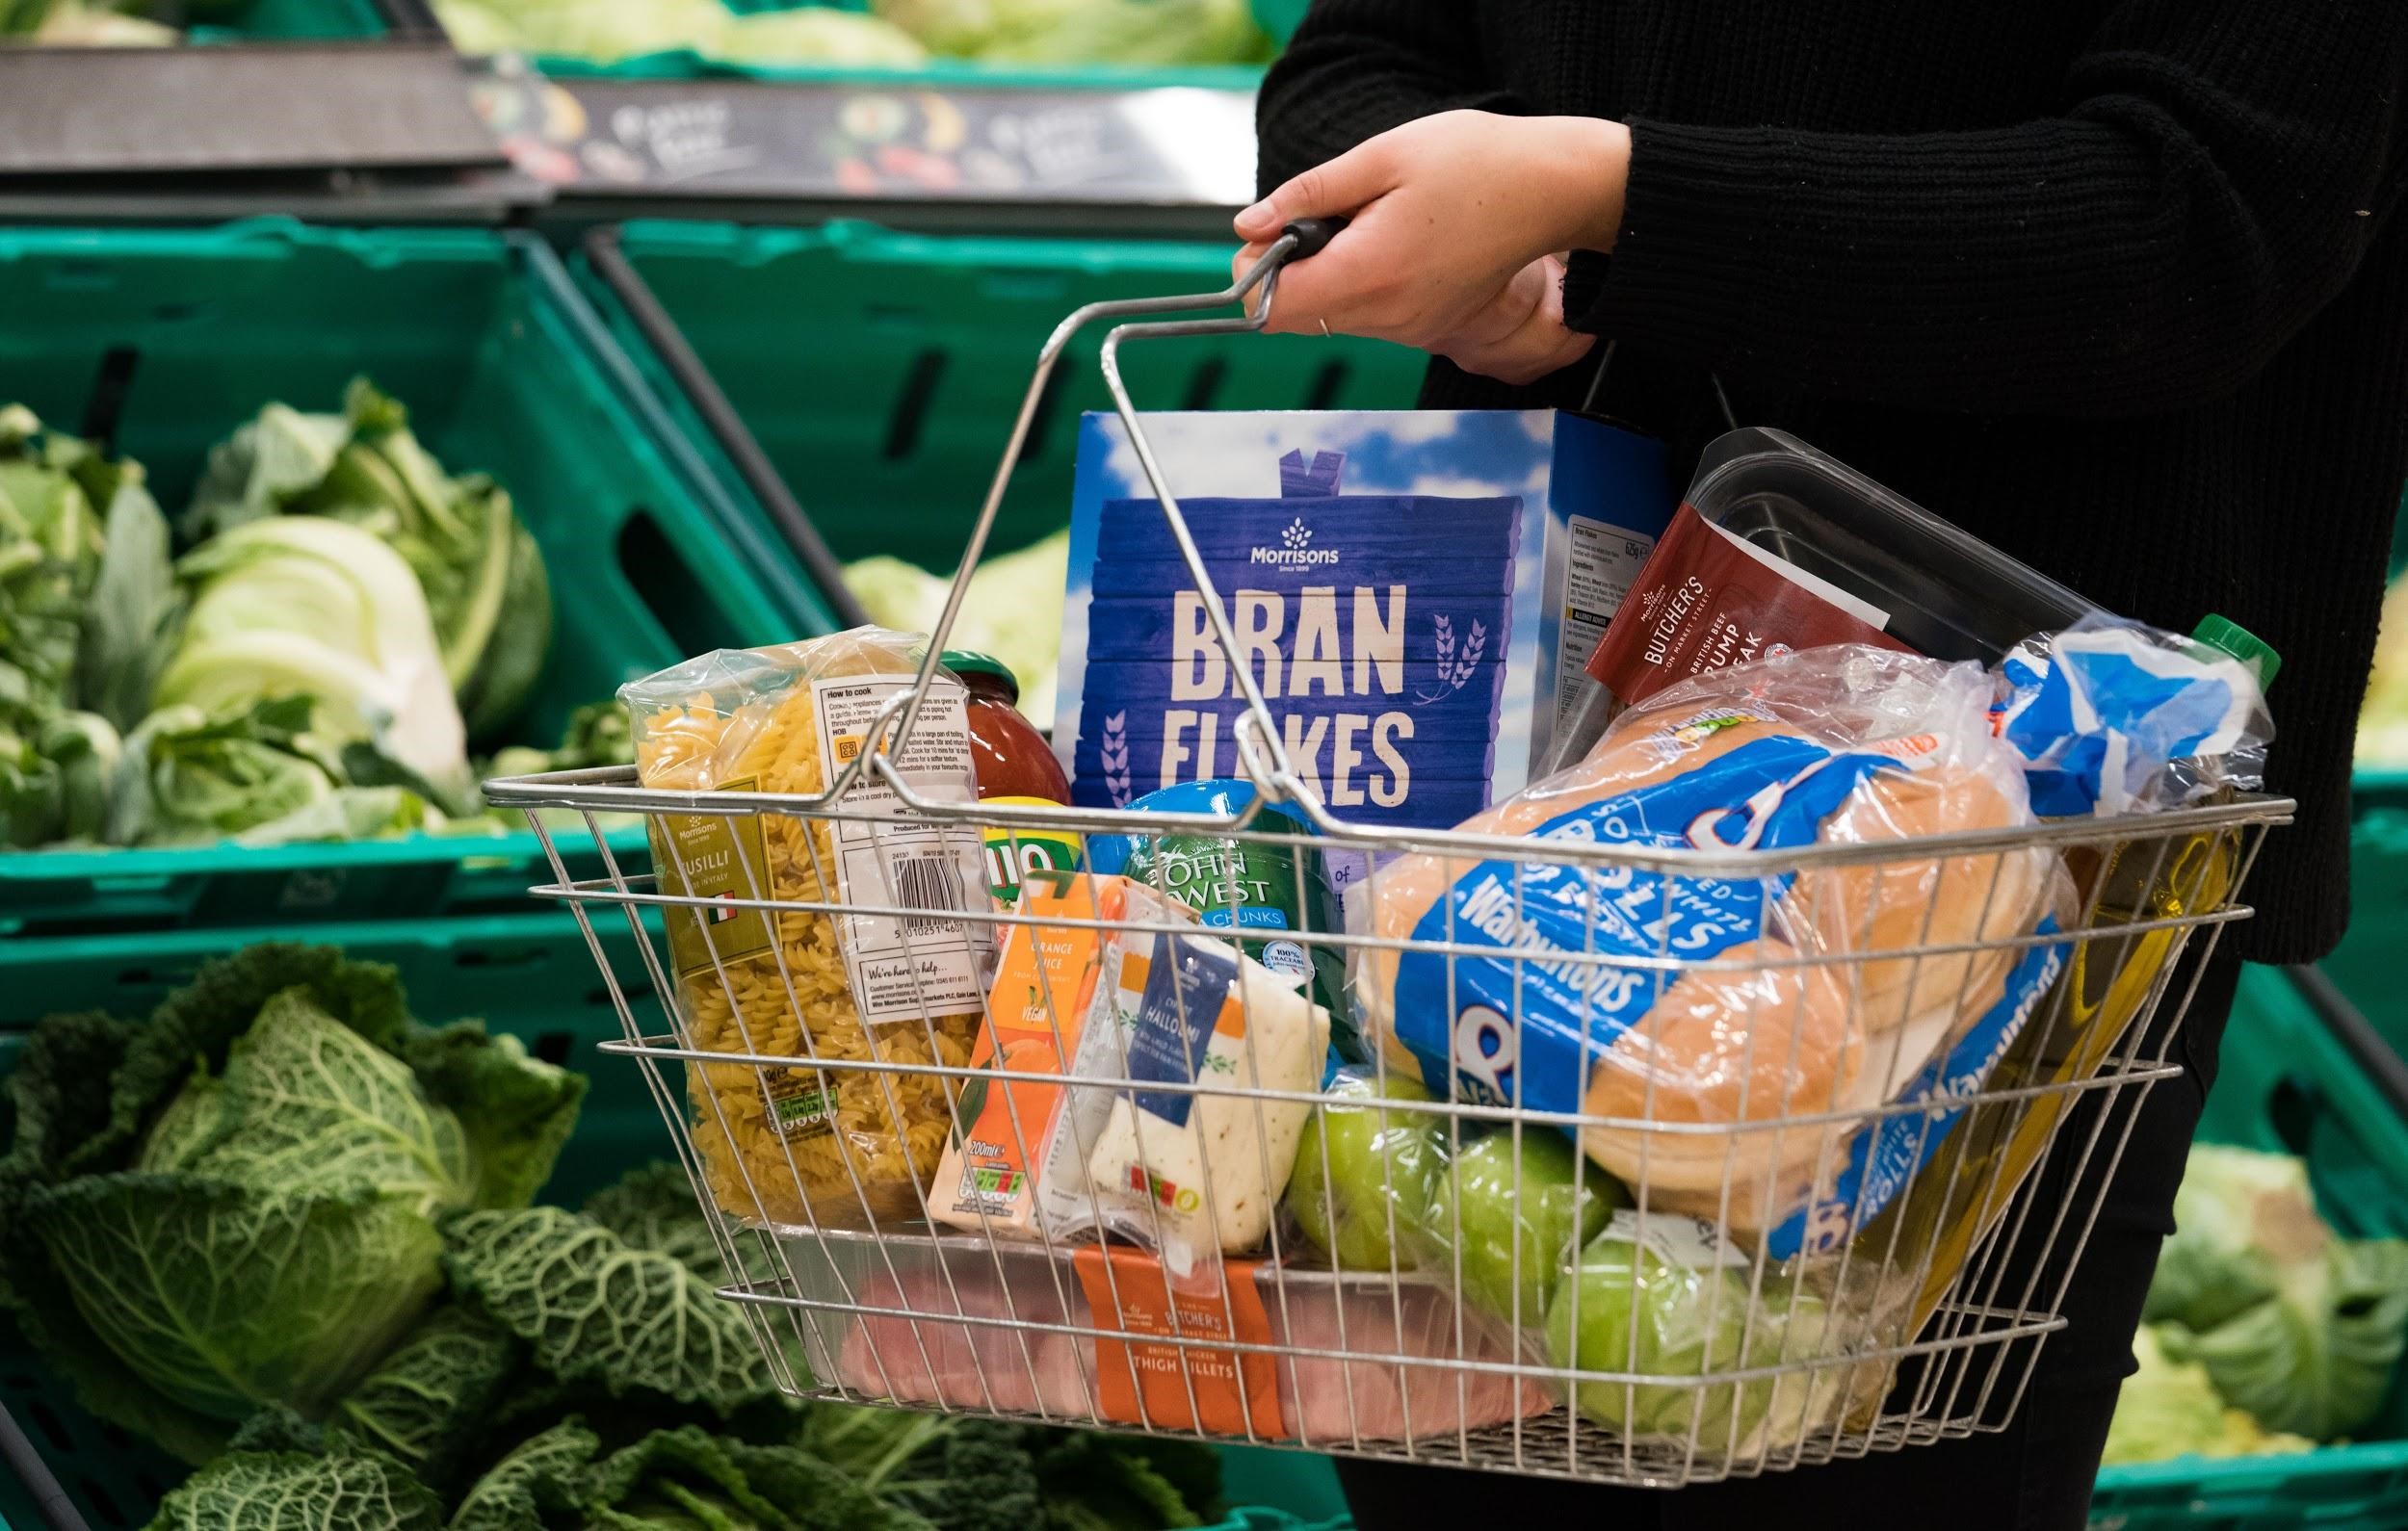 MORRISONS SLASHES PRICES OF GROCERY ESSENTIALS